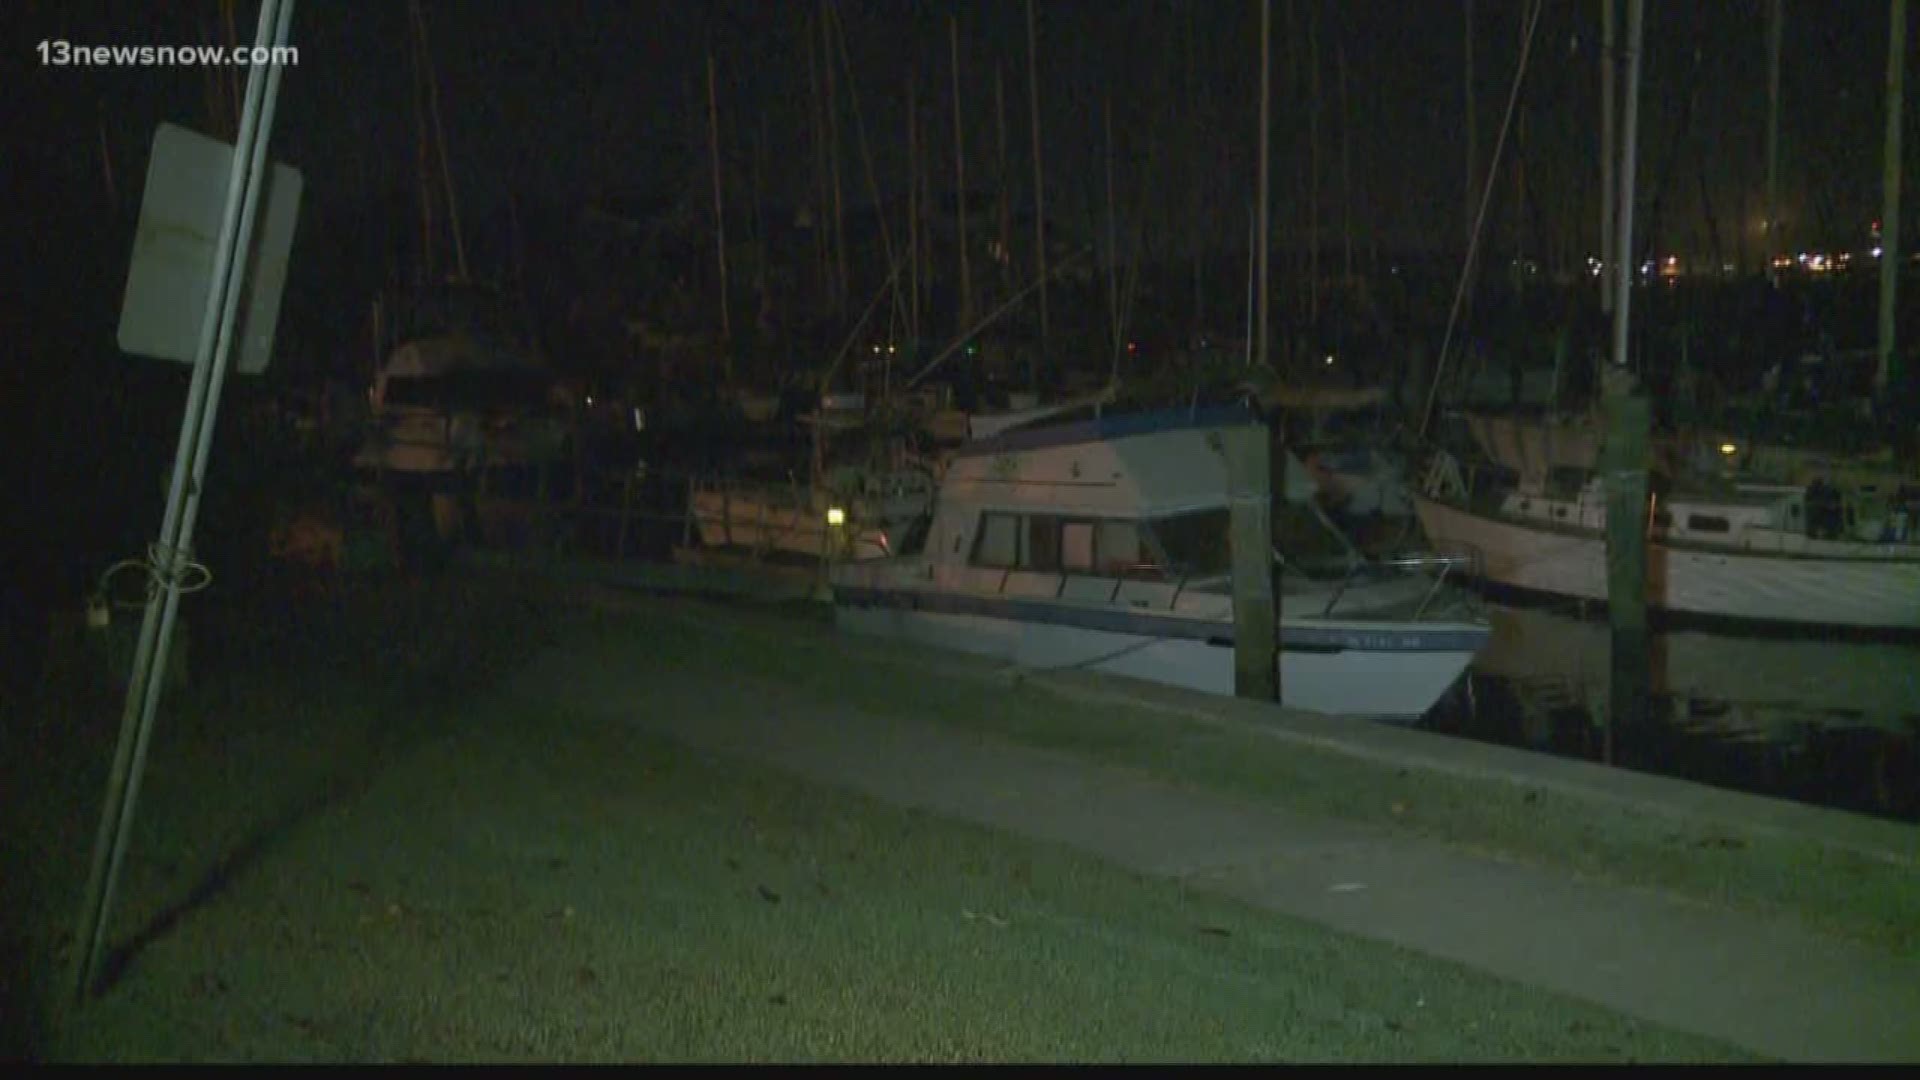 The body of an adult man was found just after midnight near East Beach.